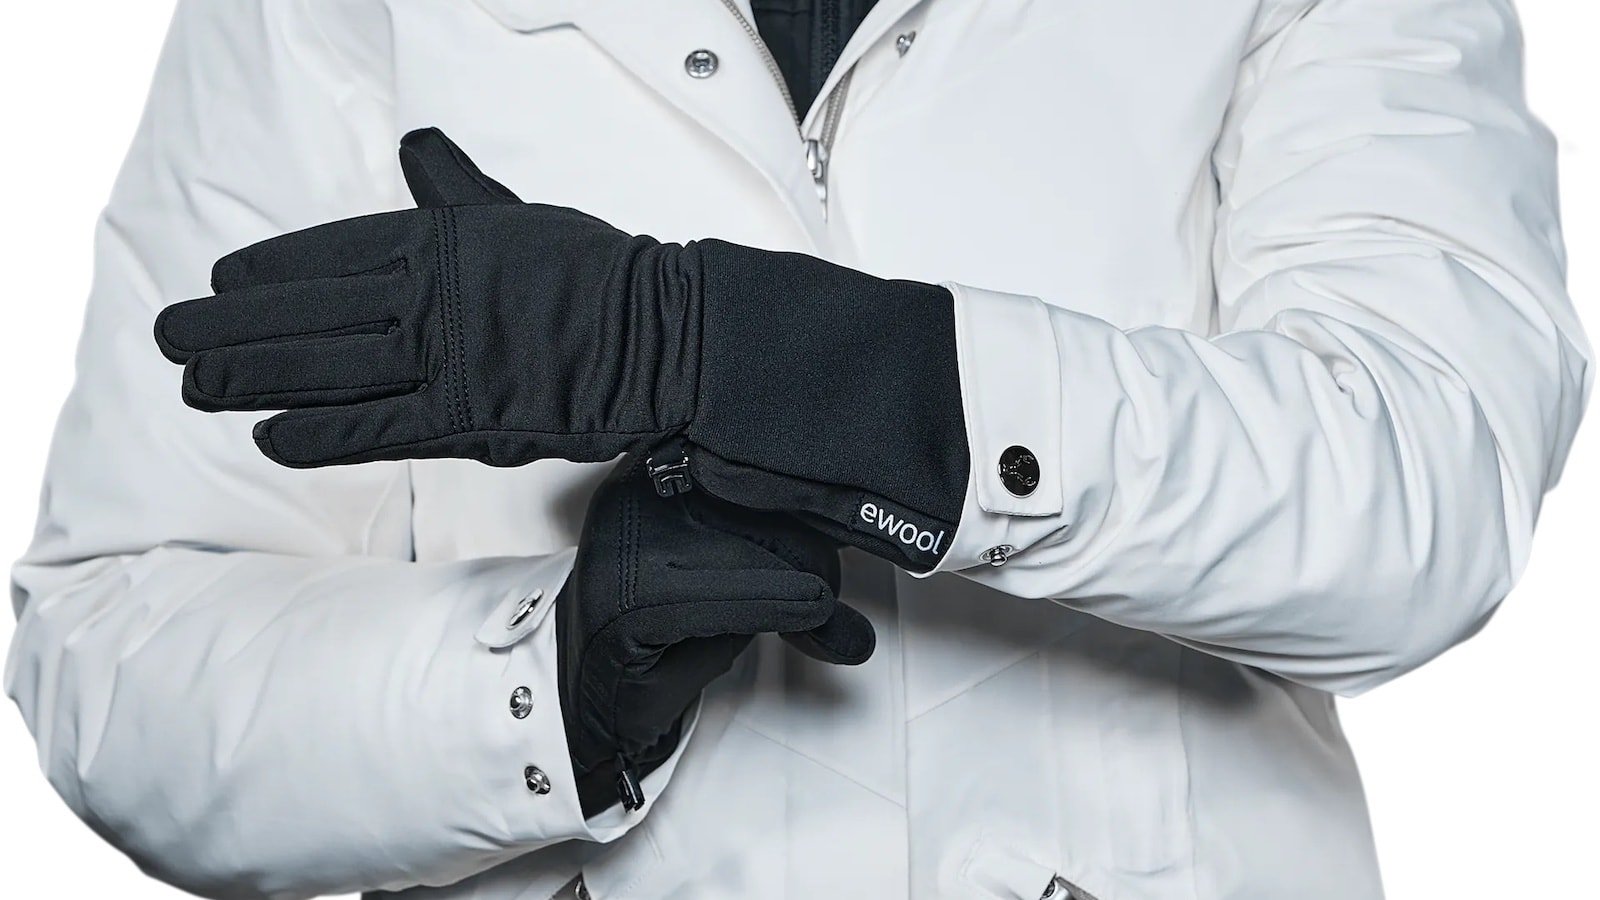 ewool 3rd Gen SnapConnect Heated Glove Liners effectively warm each finger separately